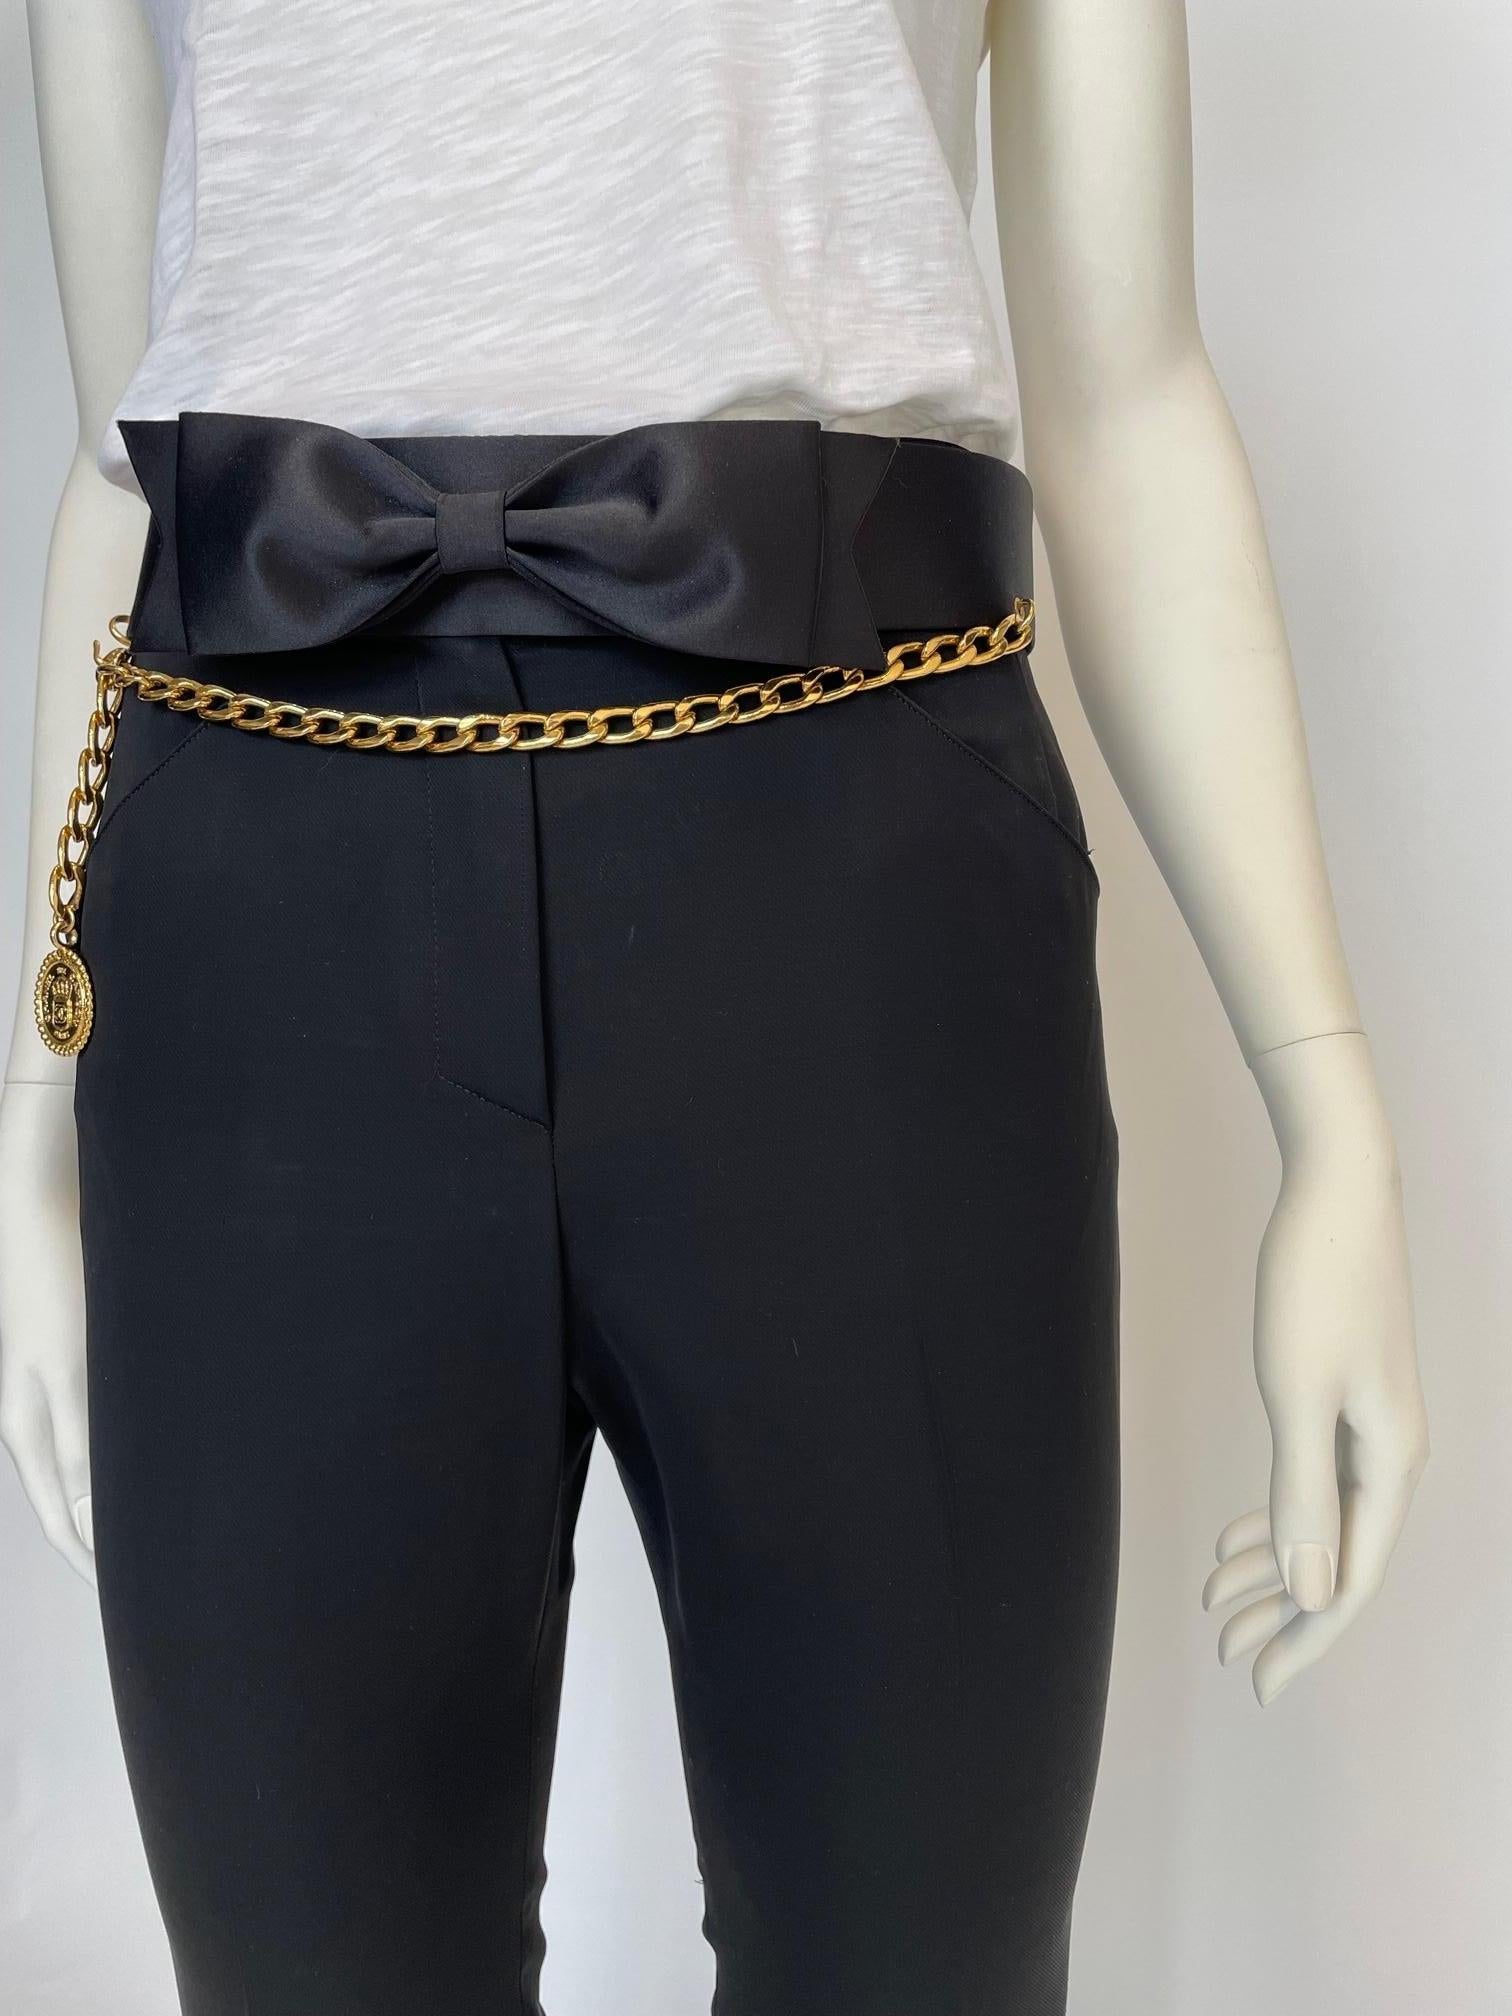 Chanel By Lagerfeld Silk Bow-Embellished Chainlink Coin Charm Waist Belt, FW1995 For Sale 2